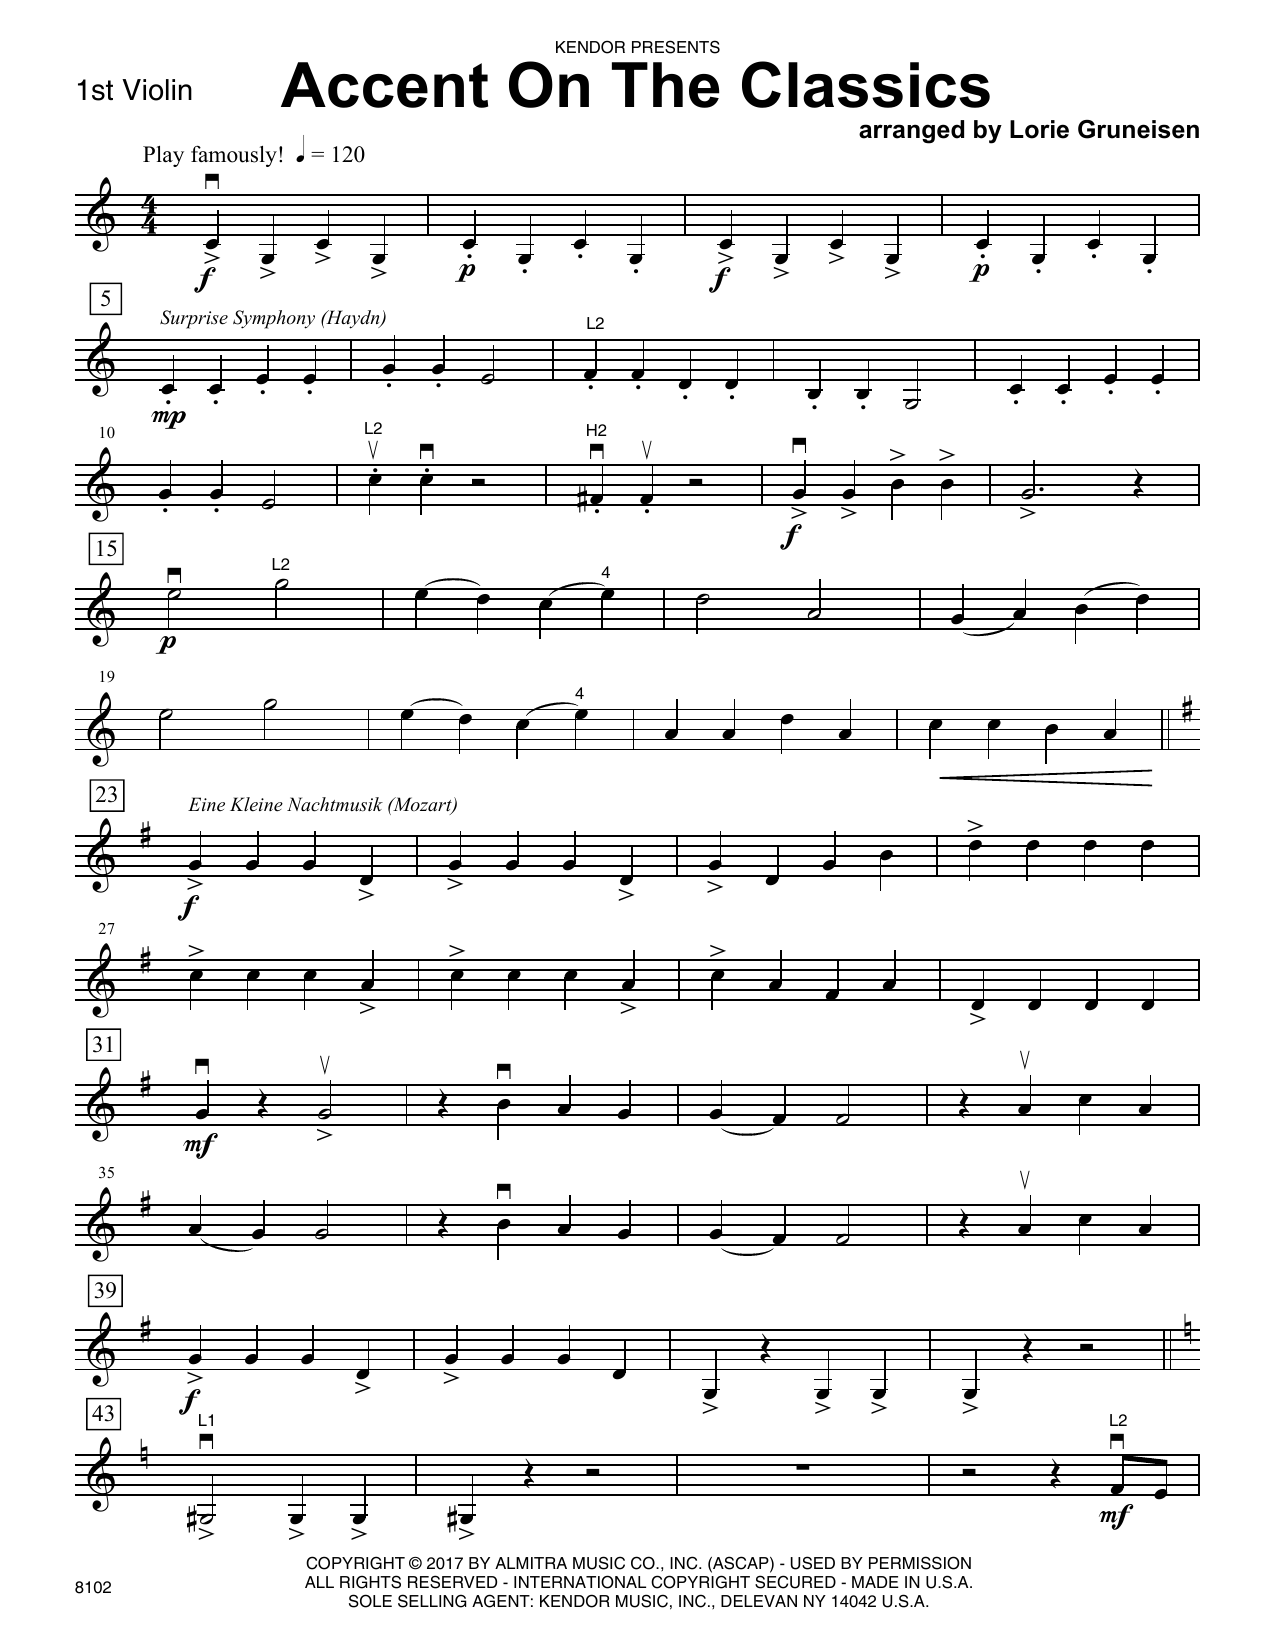 Download Lorie Gruneisen Accent On The Classics - 1st Violin Sheet Music